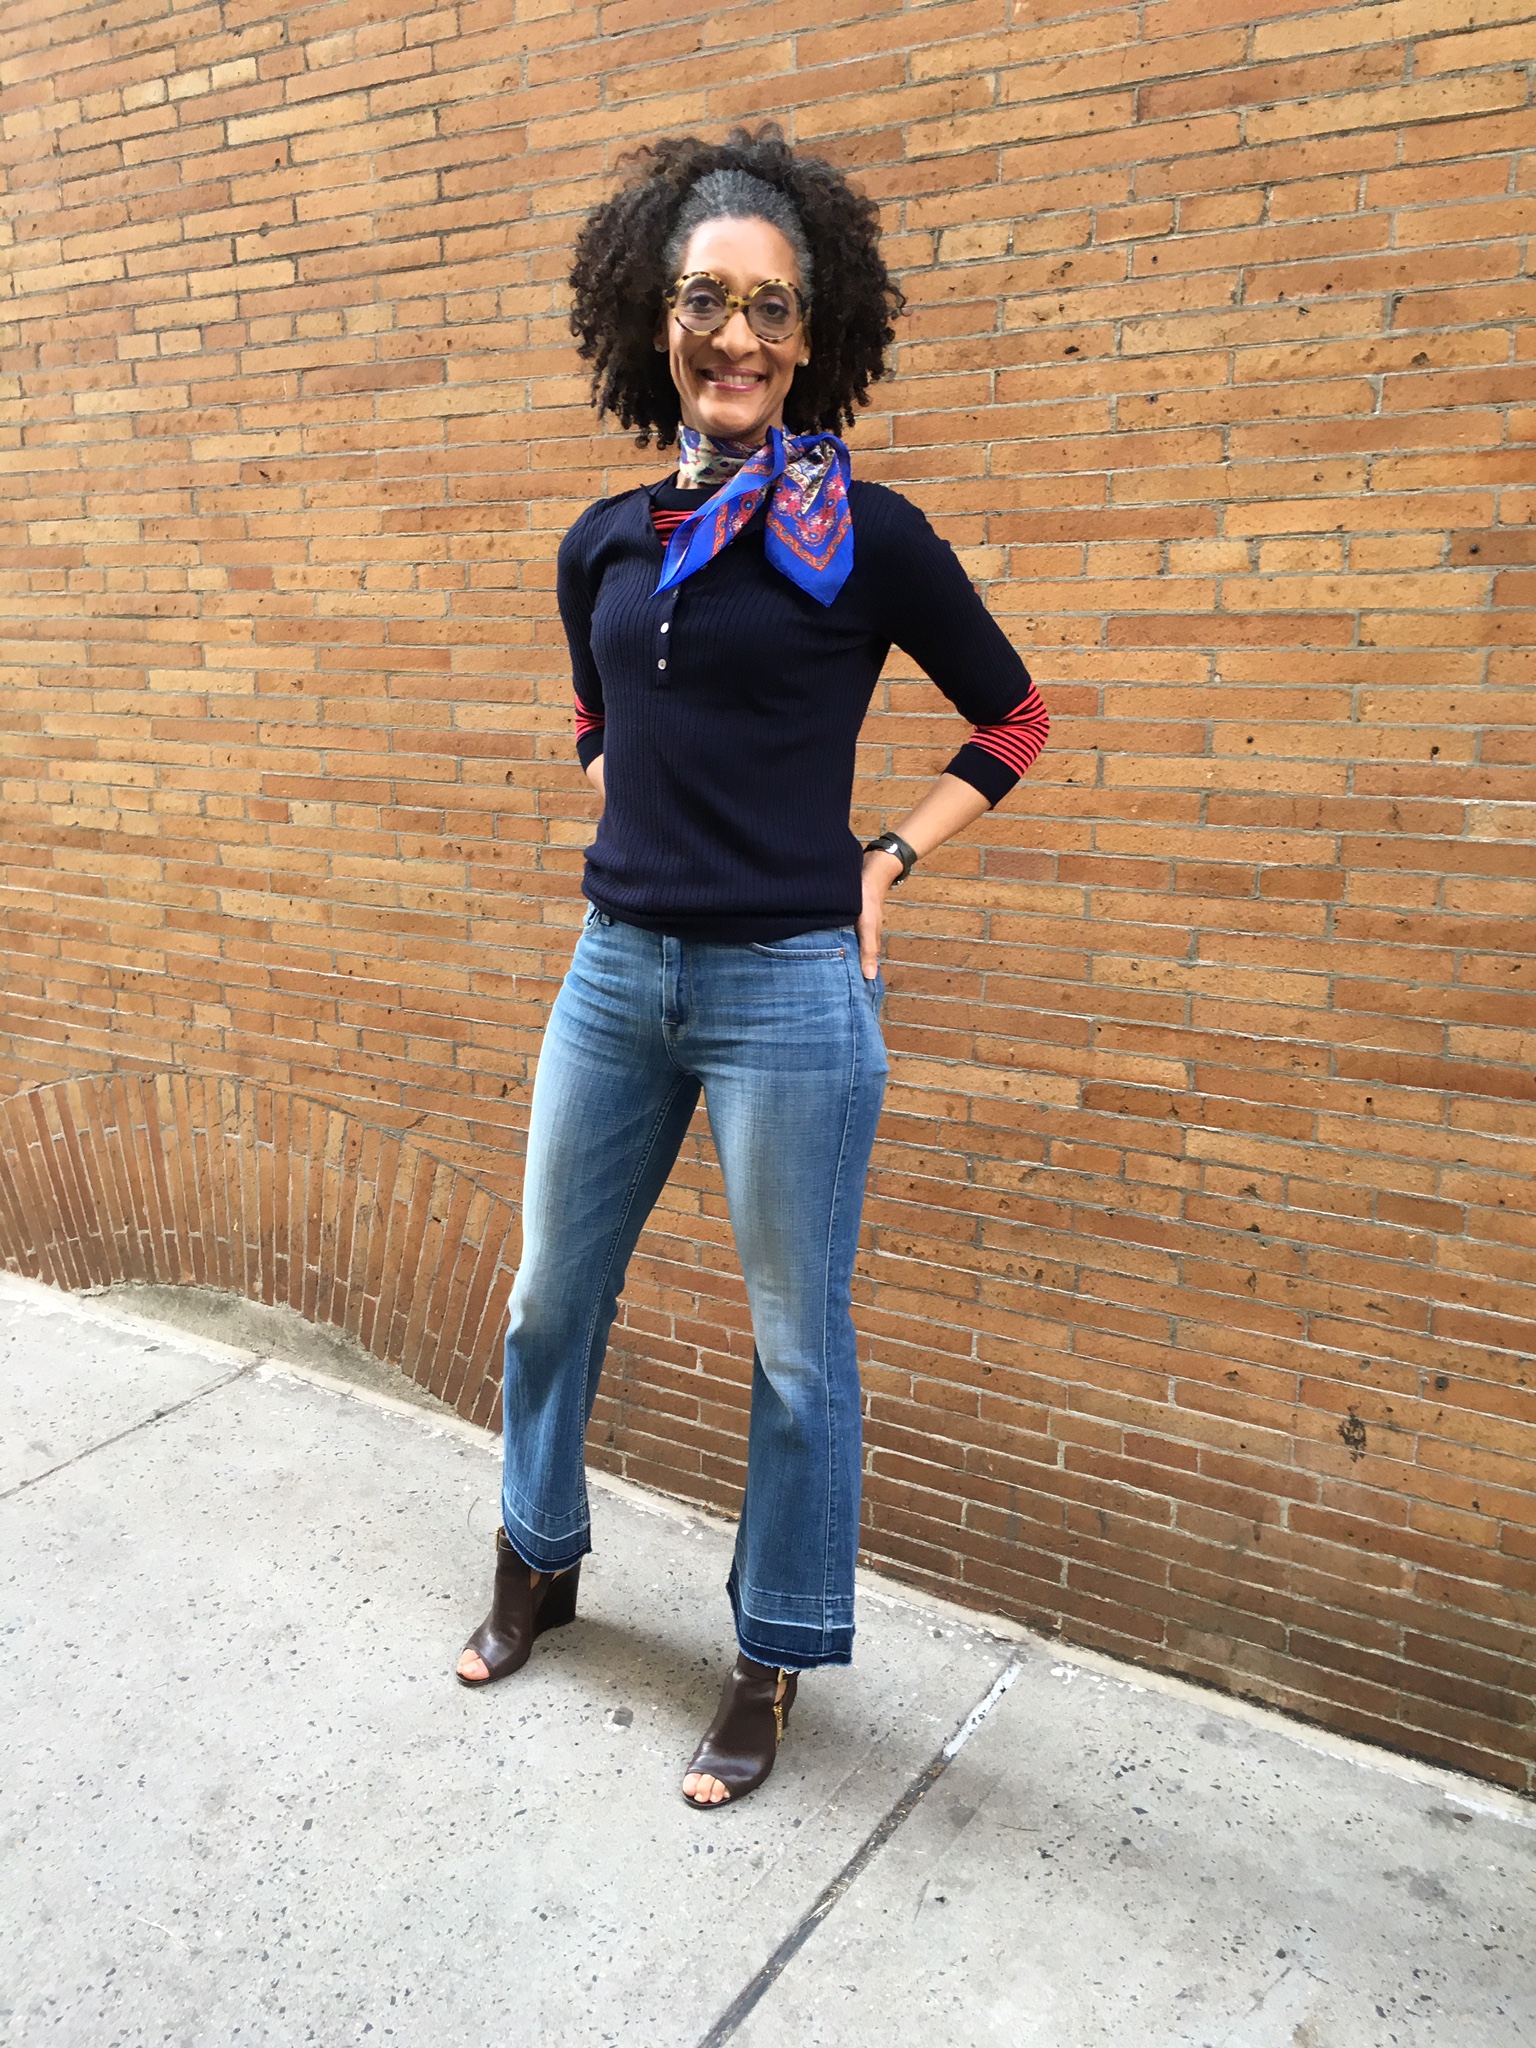 Accessorize:  jeans, and sweater and scarf